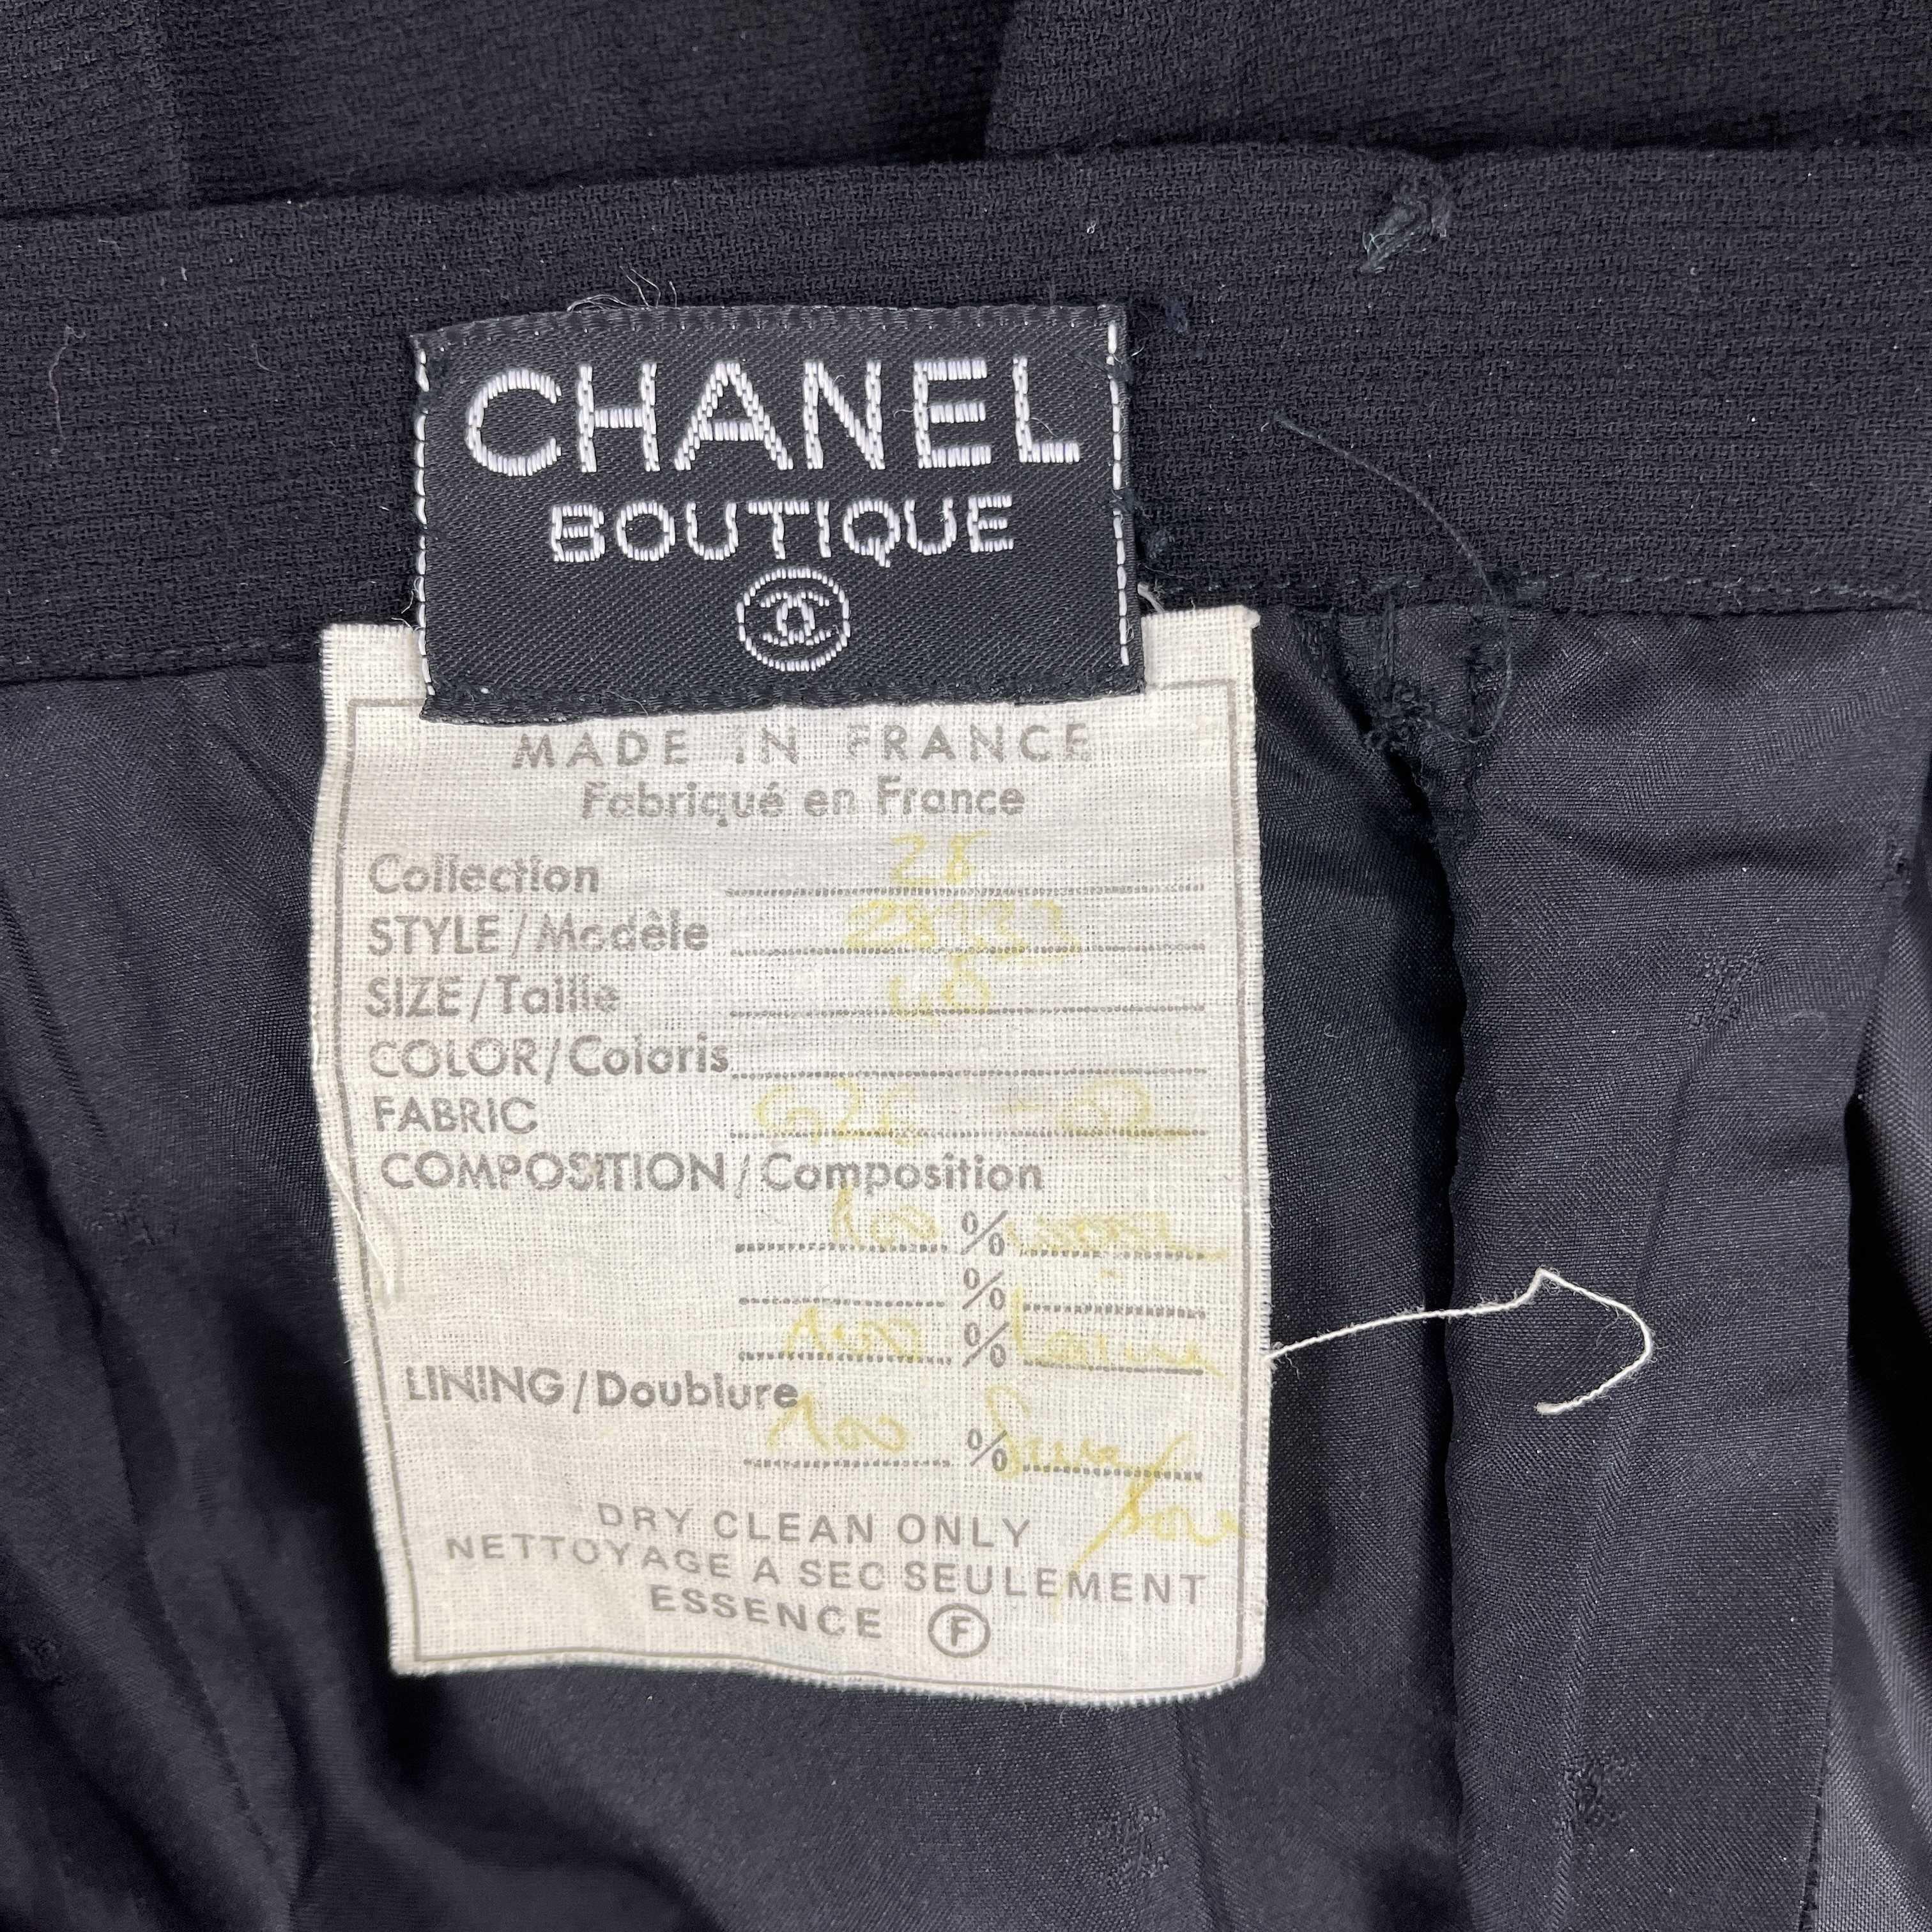 CHANEL - Very Good - Vintage Collection 28 Camellia Suit Jacket set 40, US 8 2